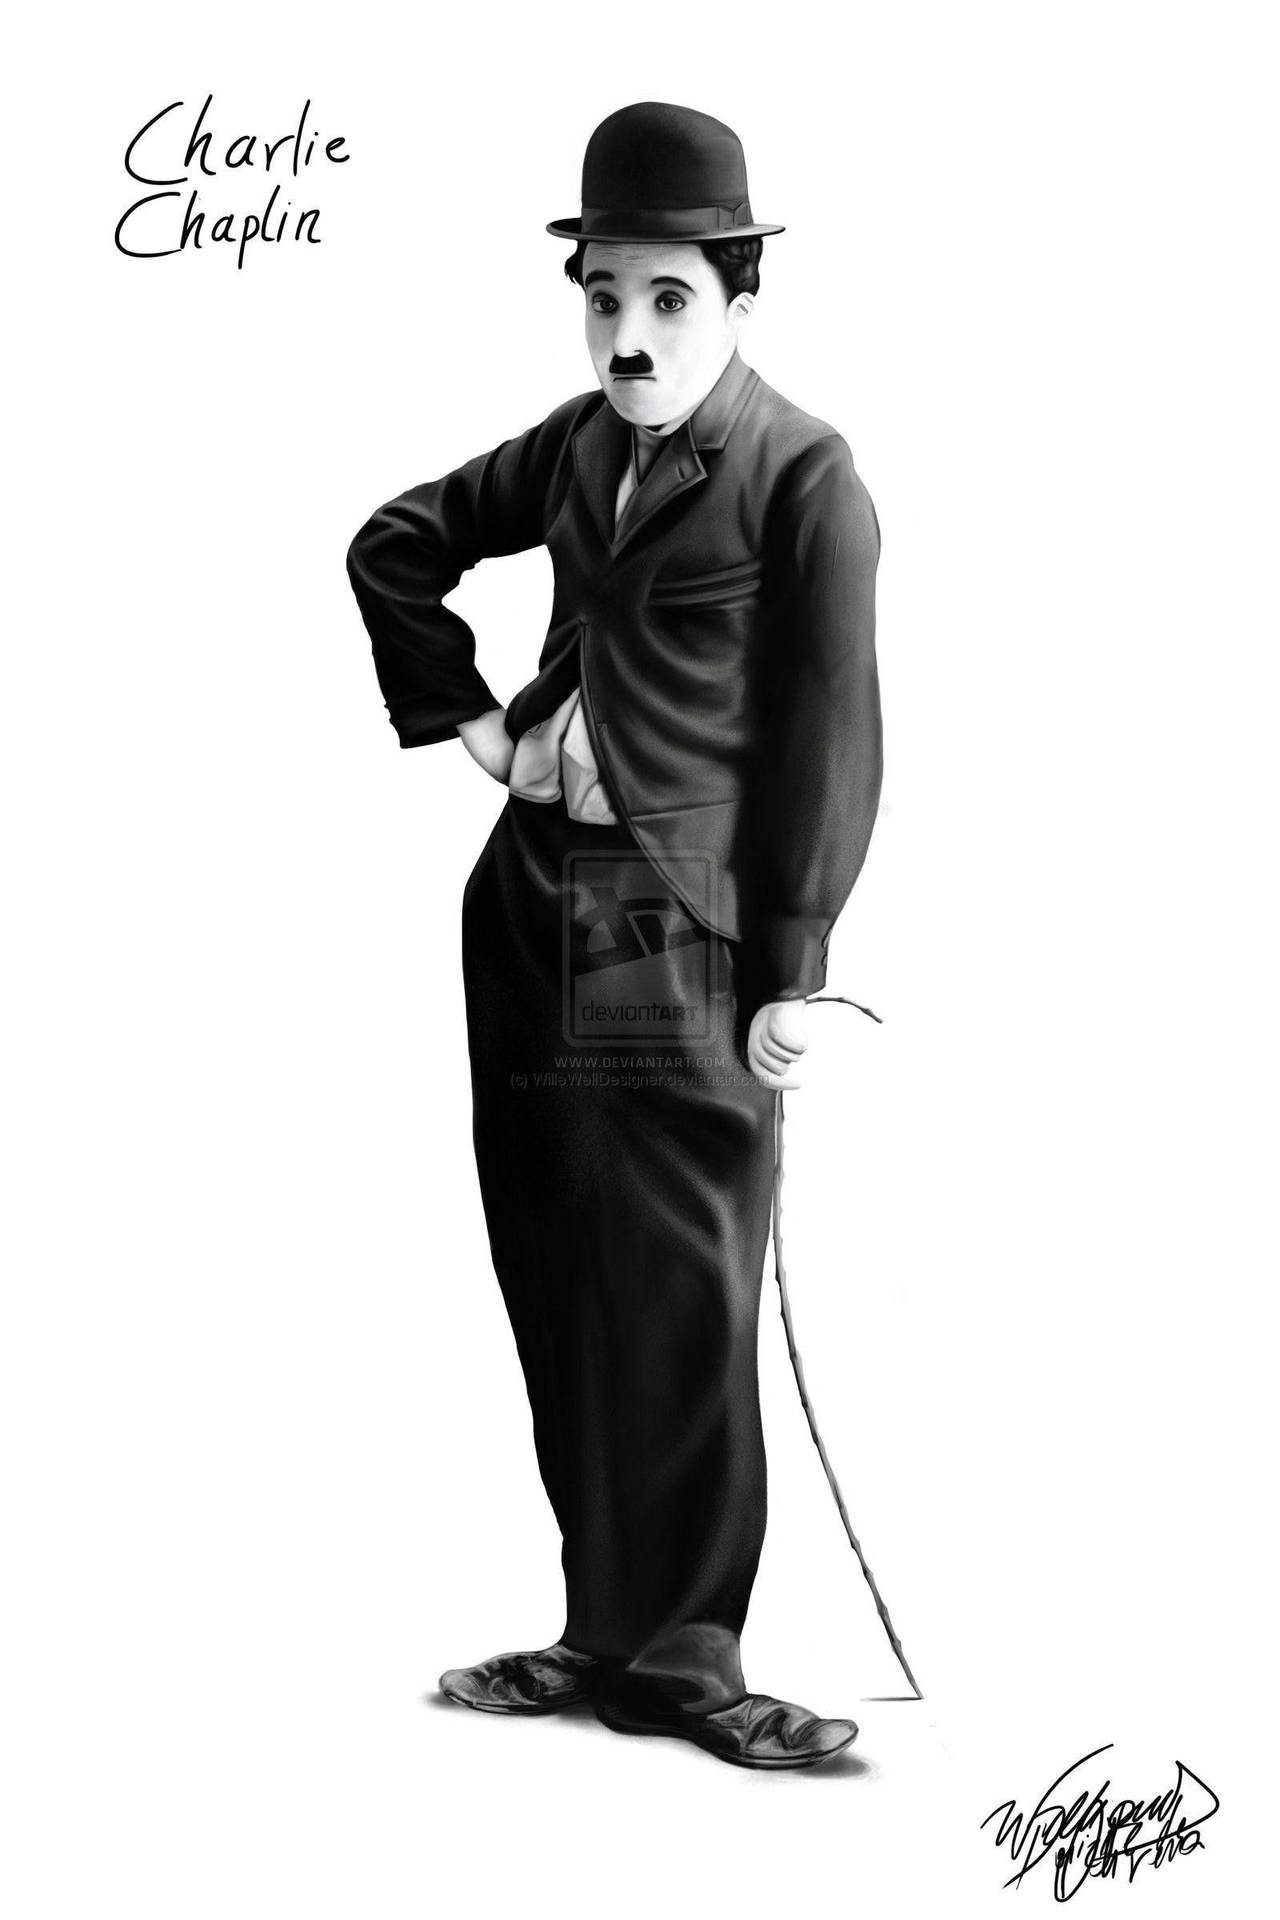 A Tribute To The Funny Genius, Charlie Chaplin Background